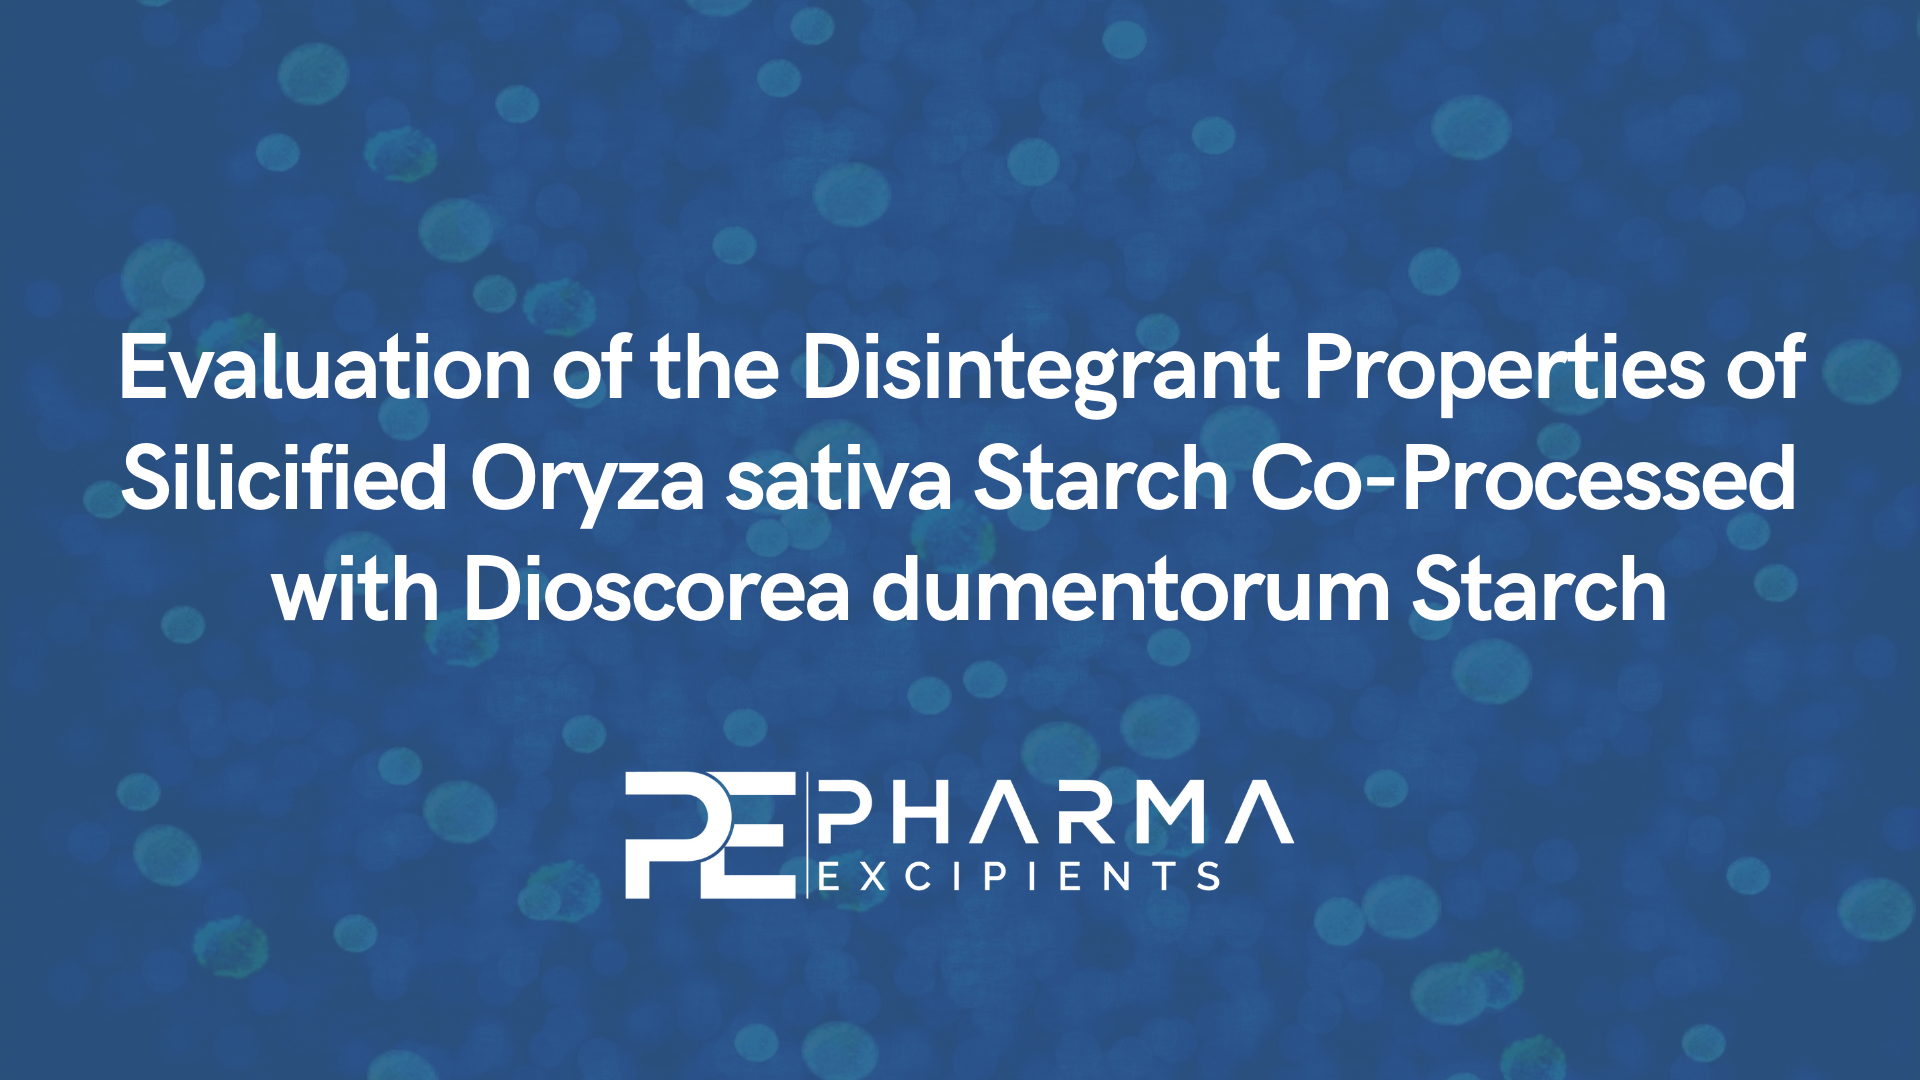 Evaluation of the Disintegrant Properties of Silicified Oryza sativa Starch Co-Processed with Dioscorea dumentorum Starch in Directly Compressed Paracetamol Tablet Formulations